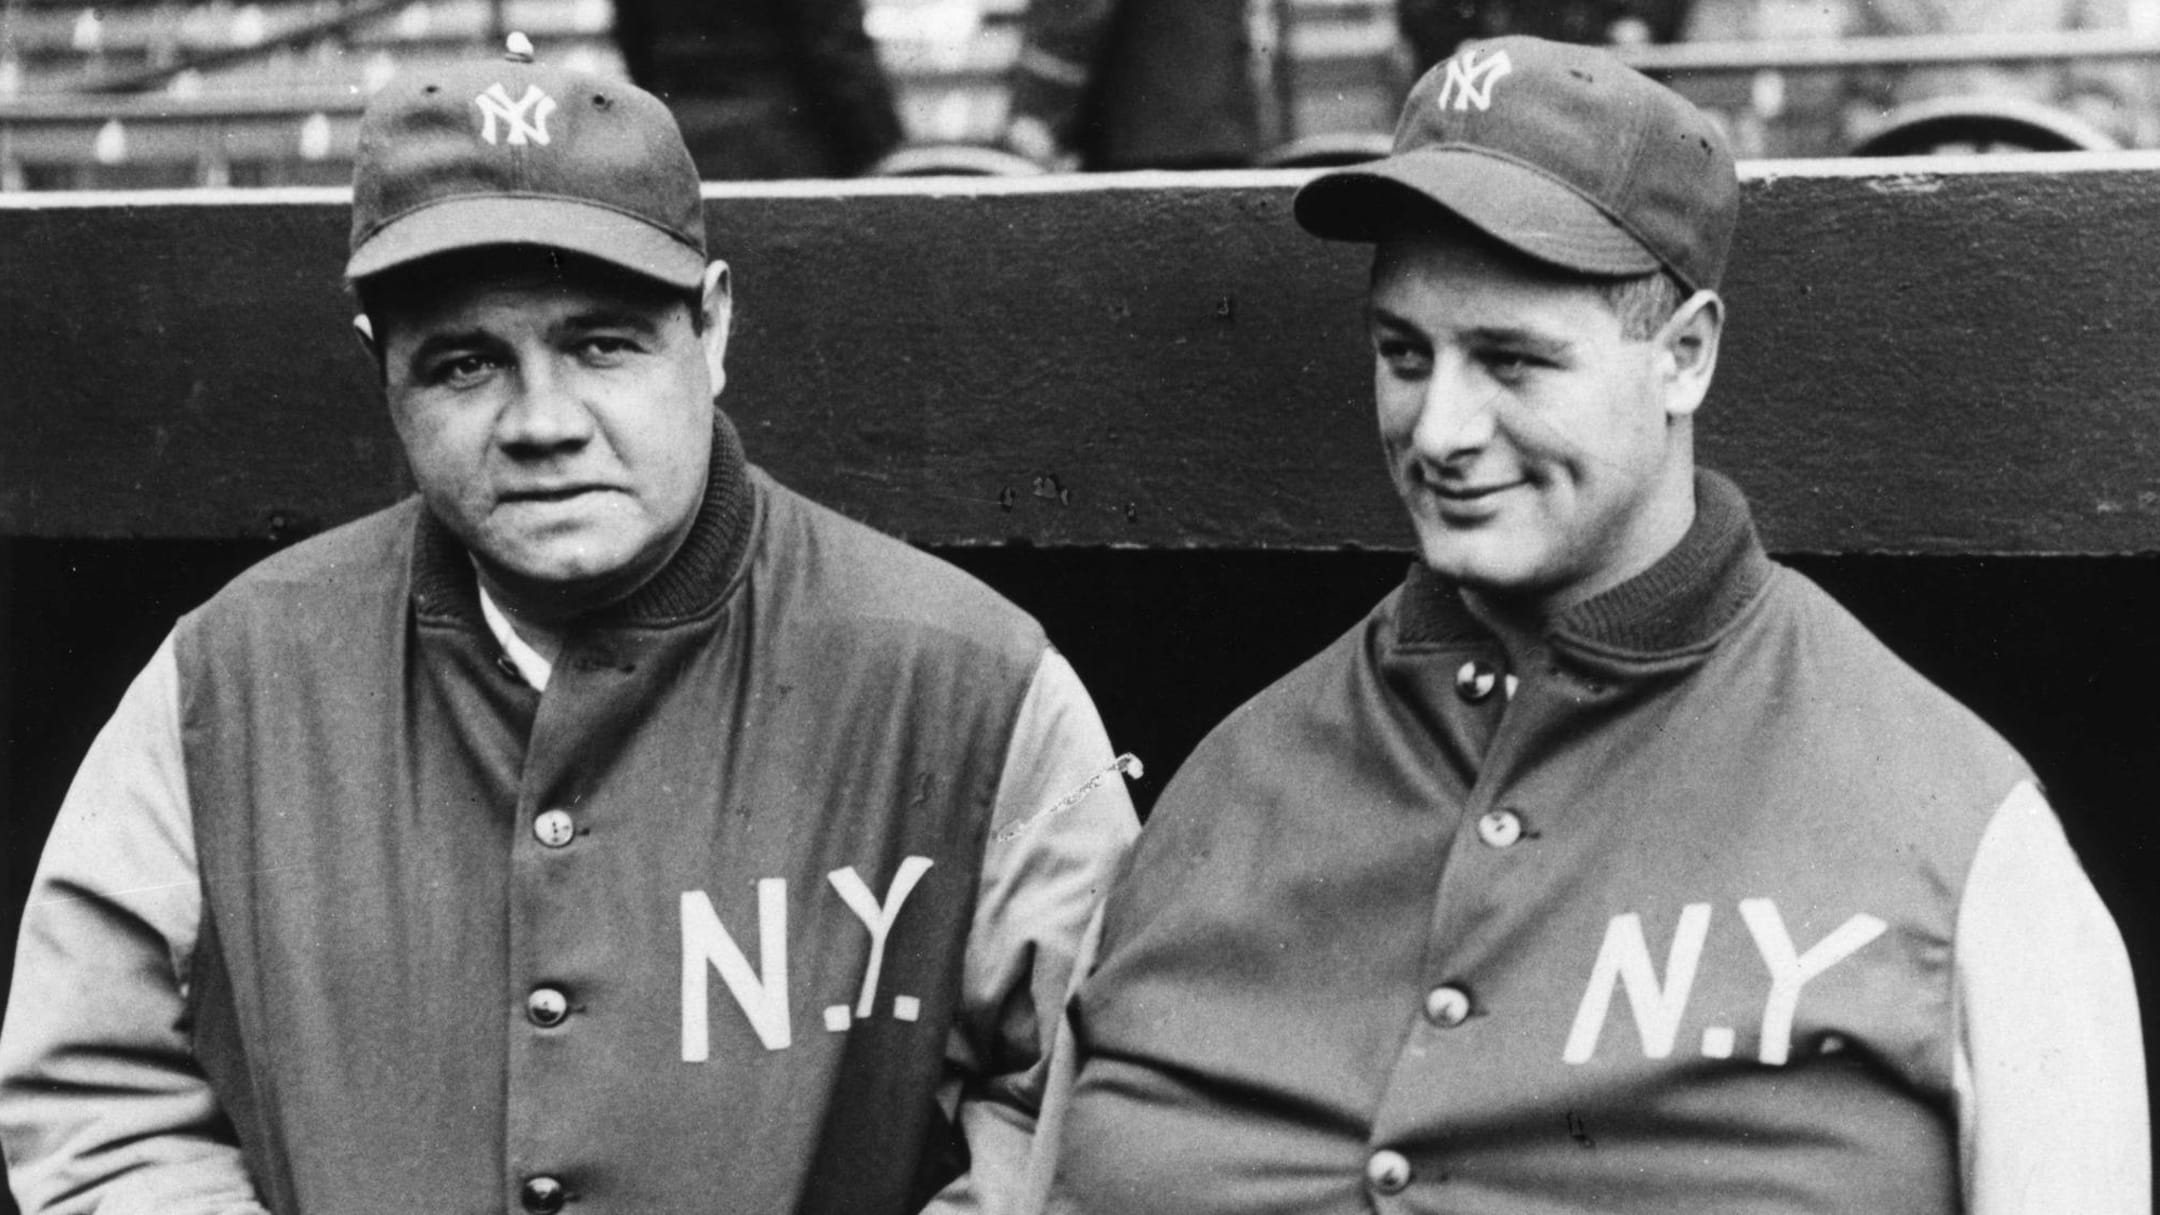 Babe Ruth and Lou Gehrig donning the Yankee Pinstripes (circa